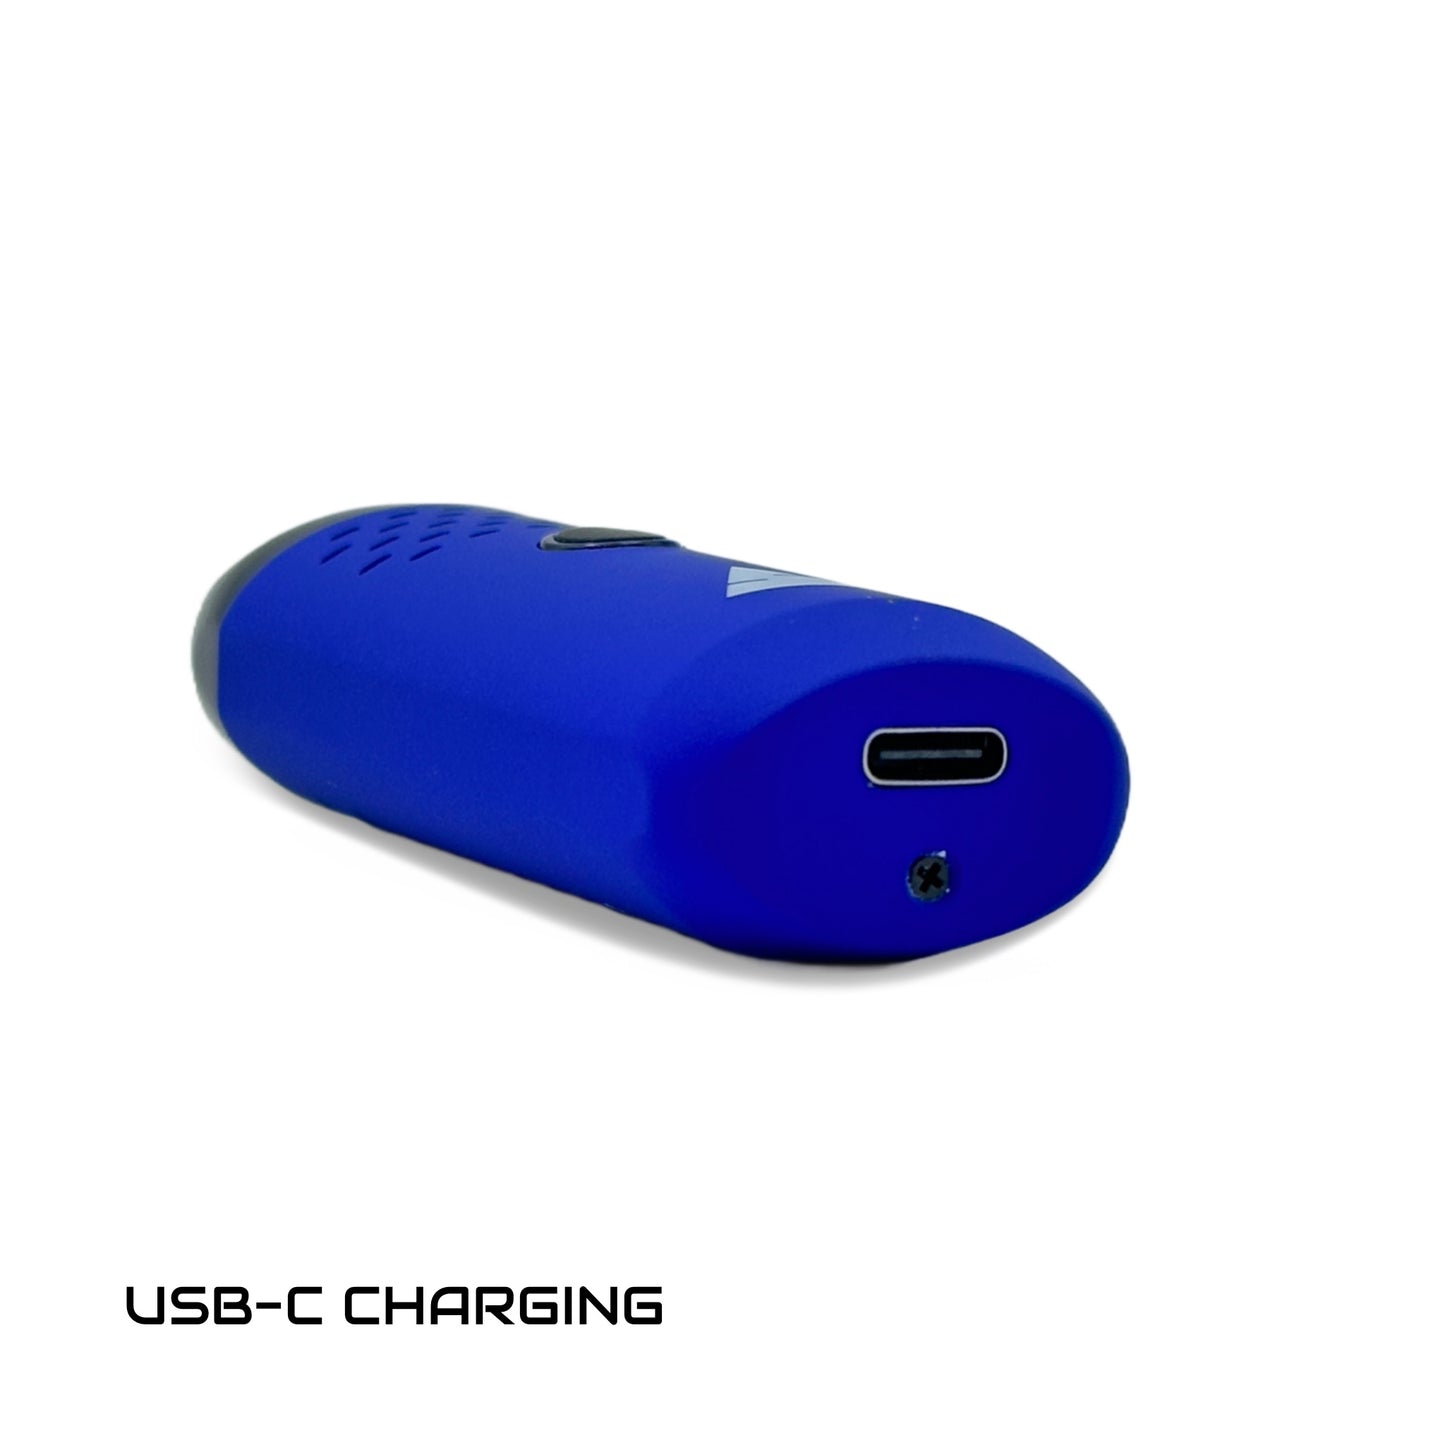 DubCharge Atom Dry Herb Vaporizer Kit - Discreet and Portable Device for Herb Vaping